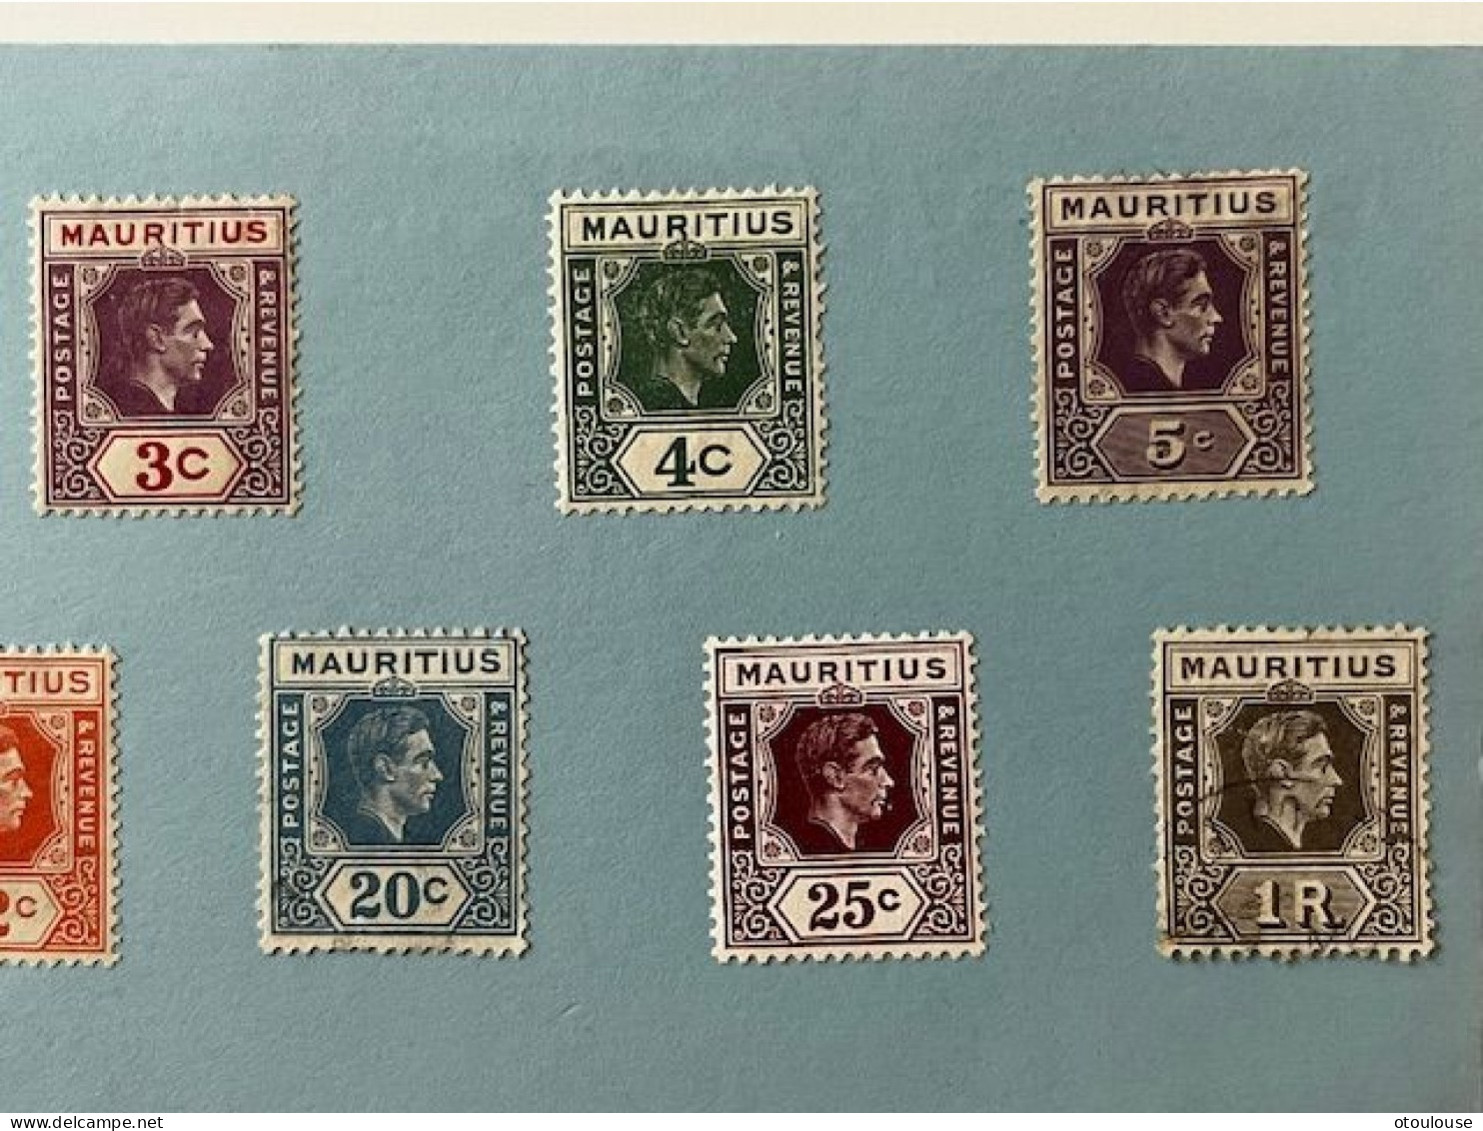 Timbres Ile Maurice 1938 (planche De 9 Timbres) - Maurice (1968-...)